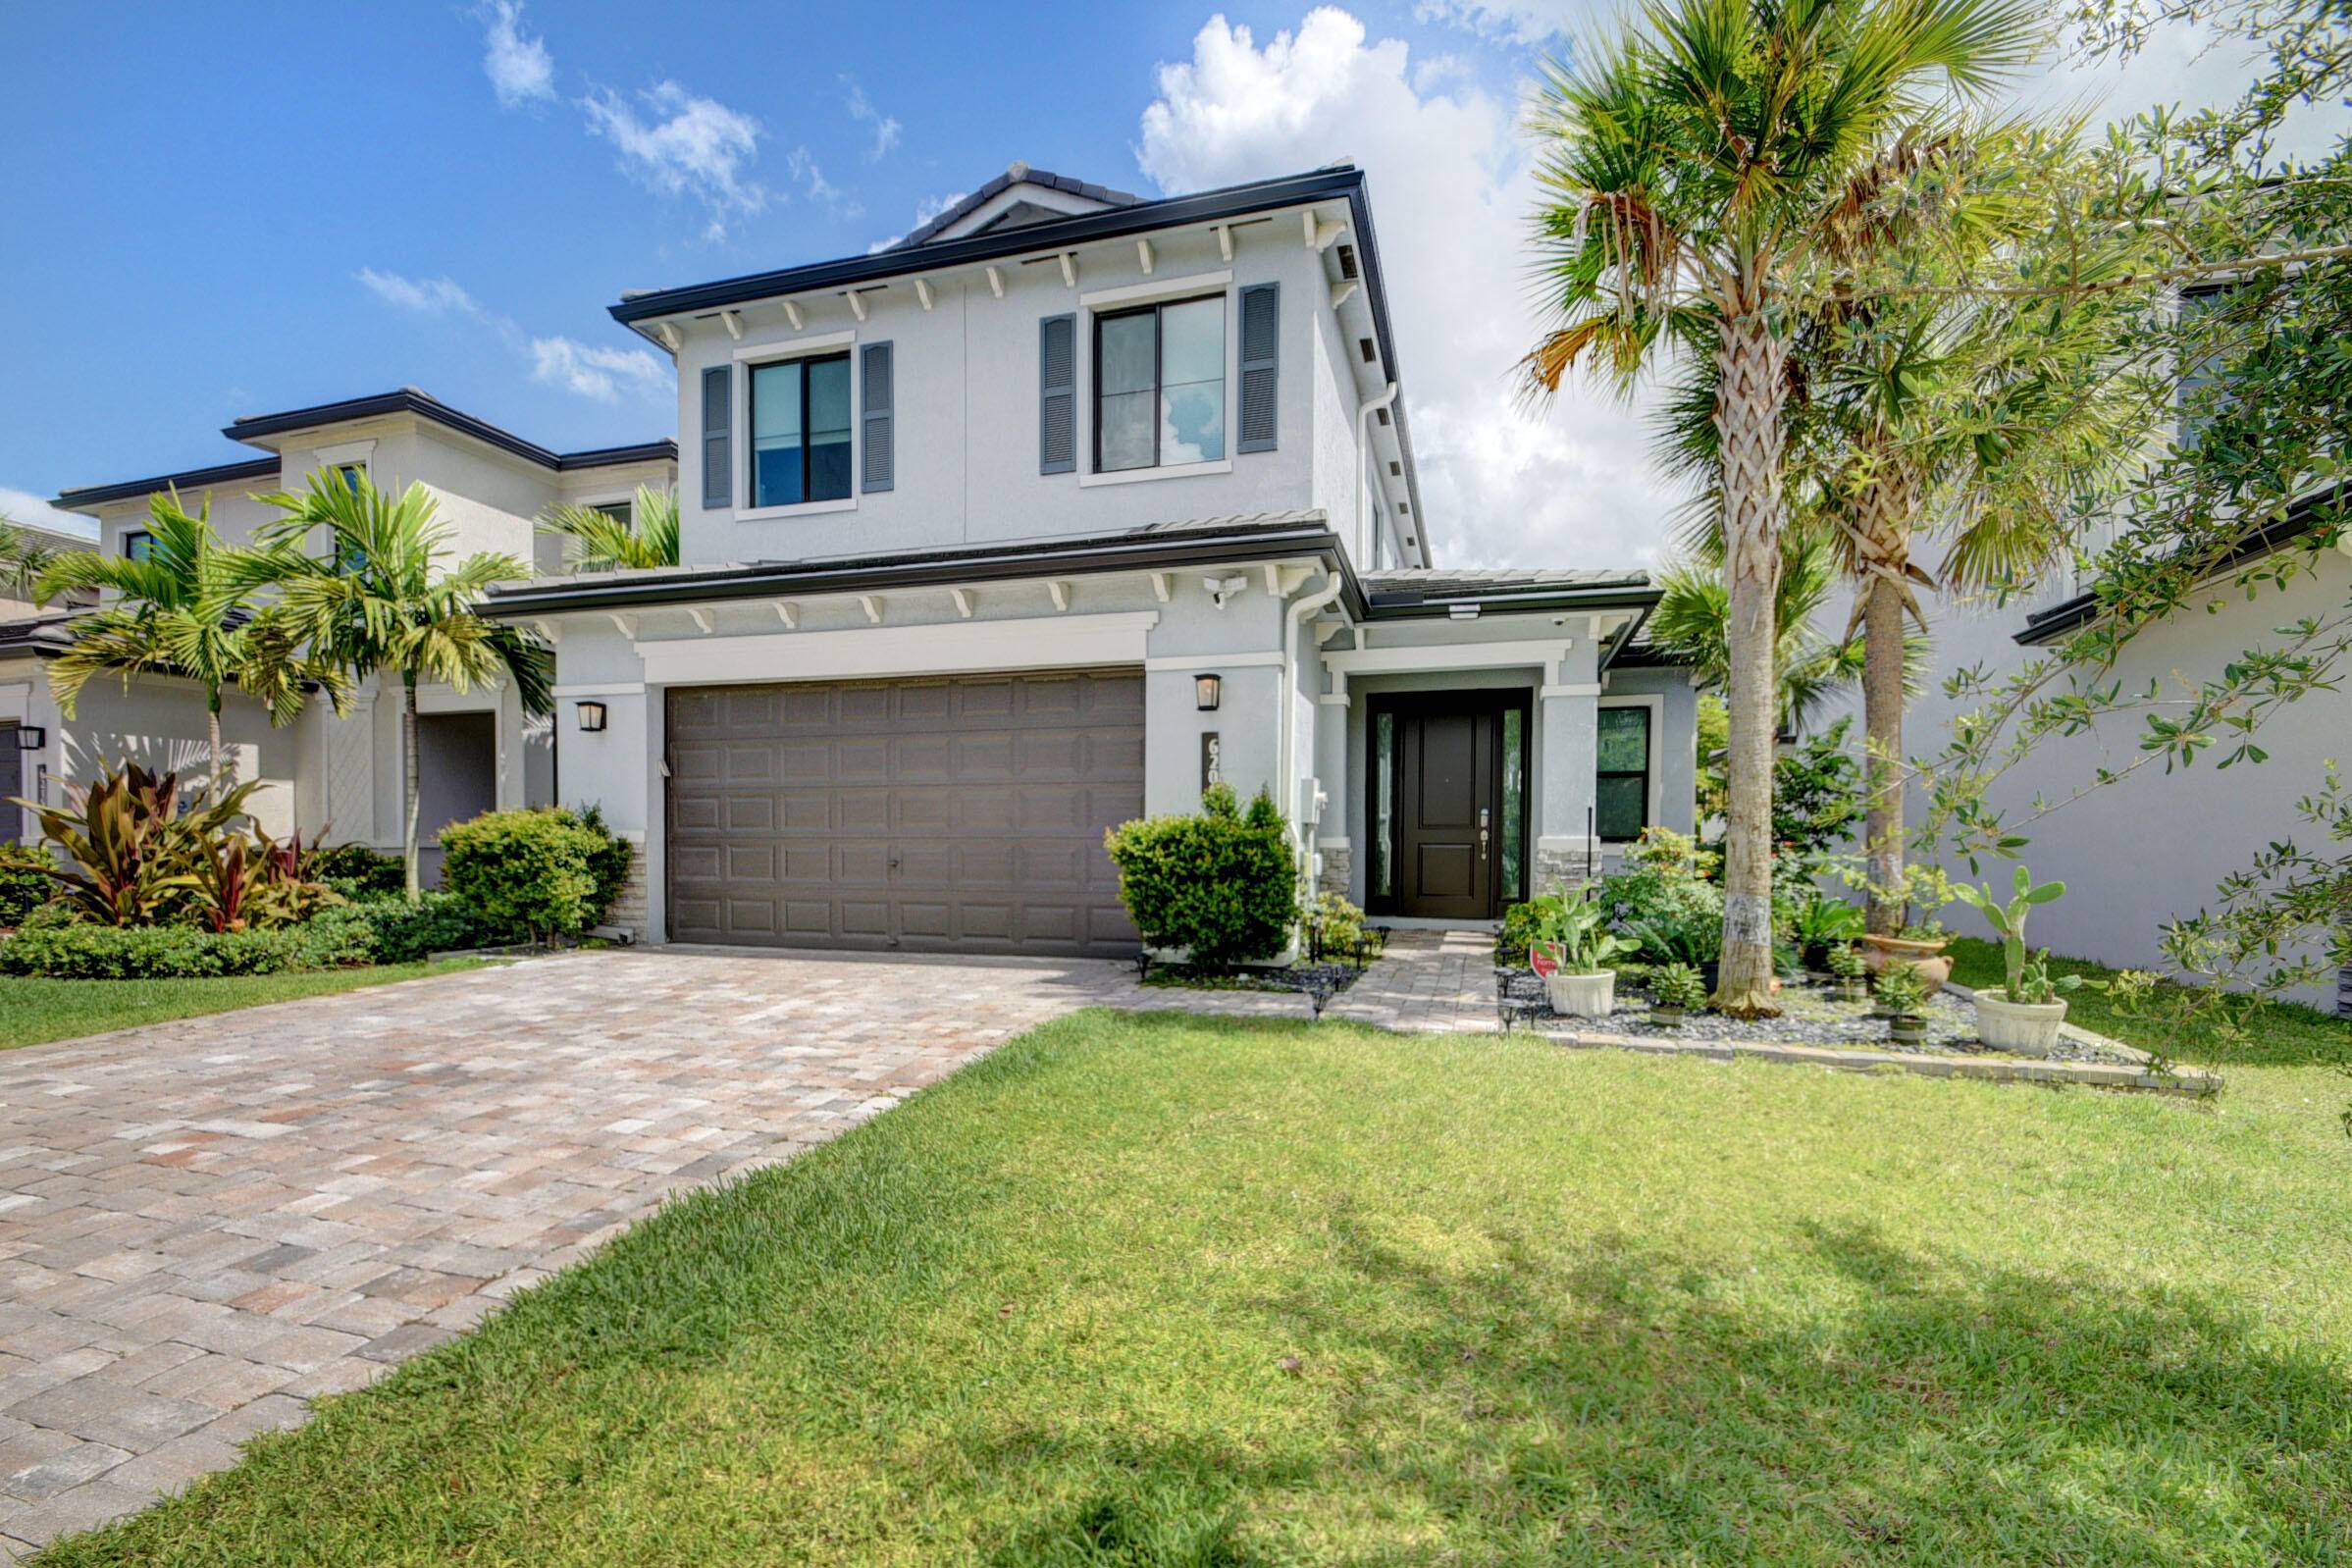 Built in 2019 ! ! This rarely available Dual Master Floorplan offers a full master suite on the main level as well as another full master suite upstairs along with ...